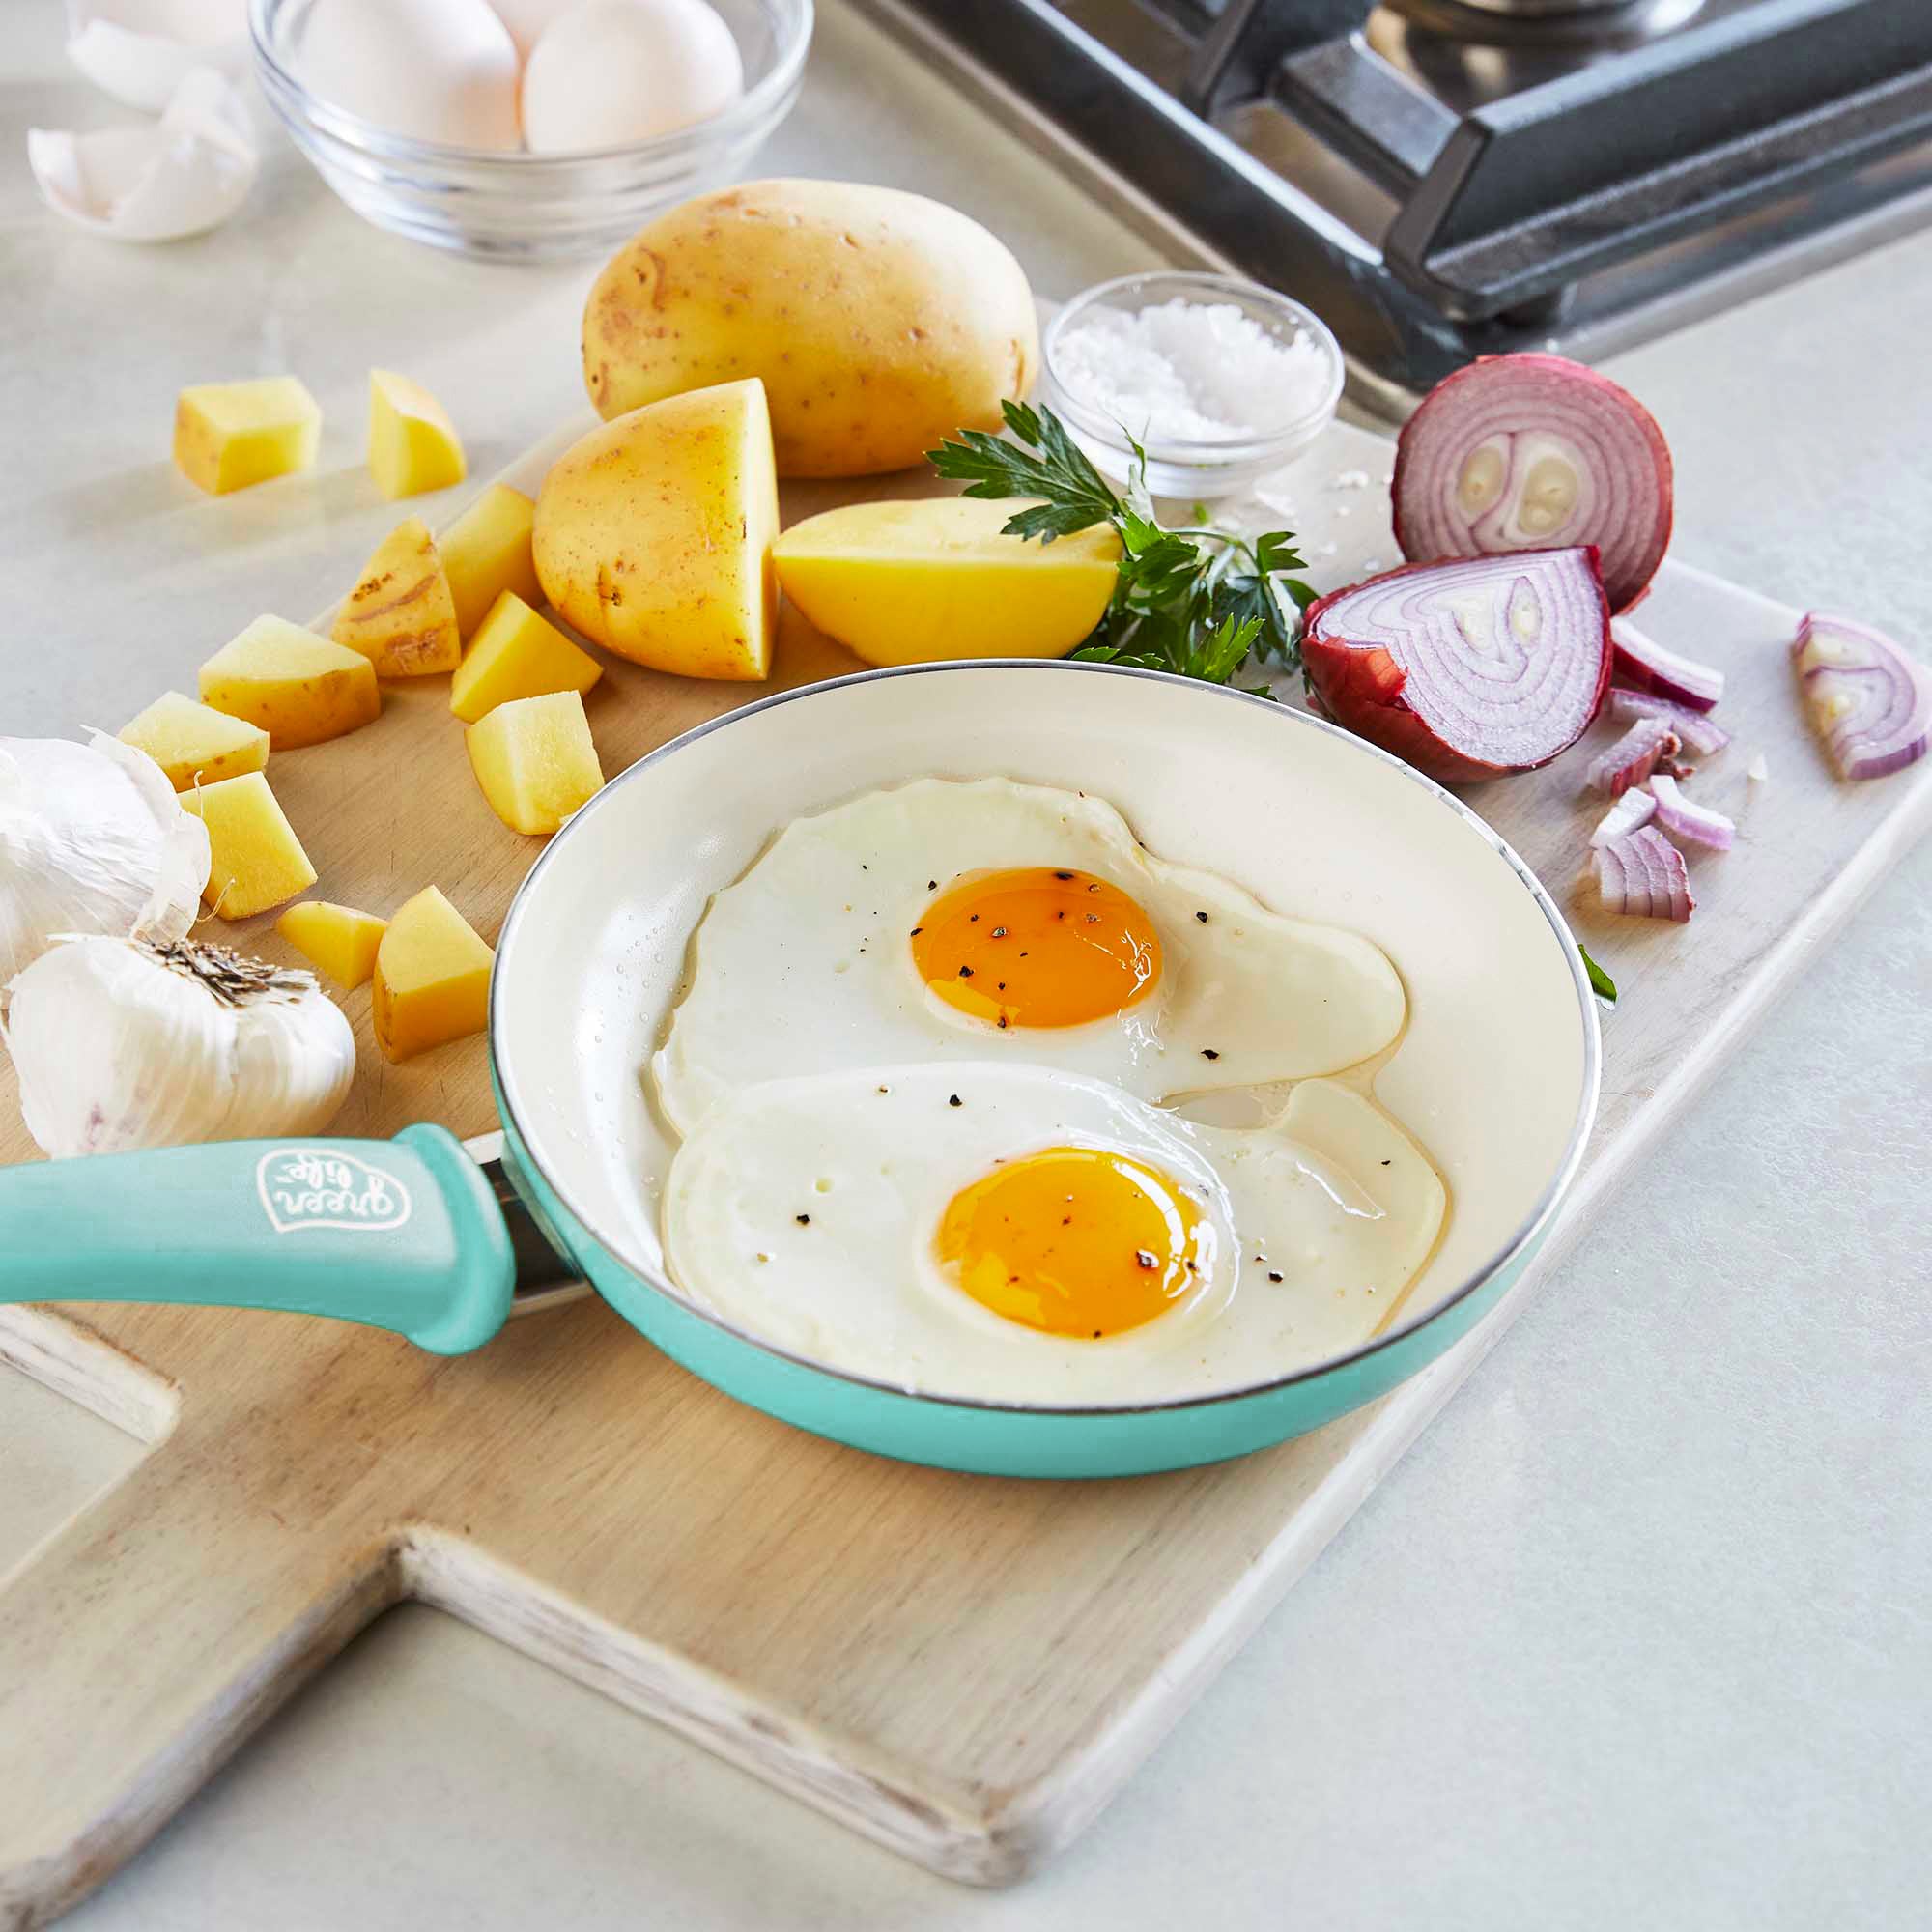 8 Inch Frying Pan with Ceramic Coating Nonstick pan Fried Egg Beef